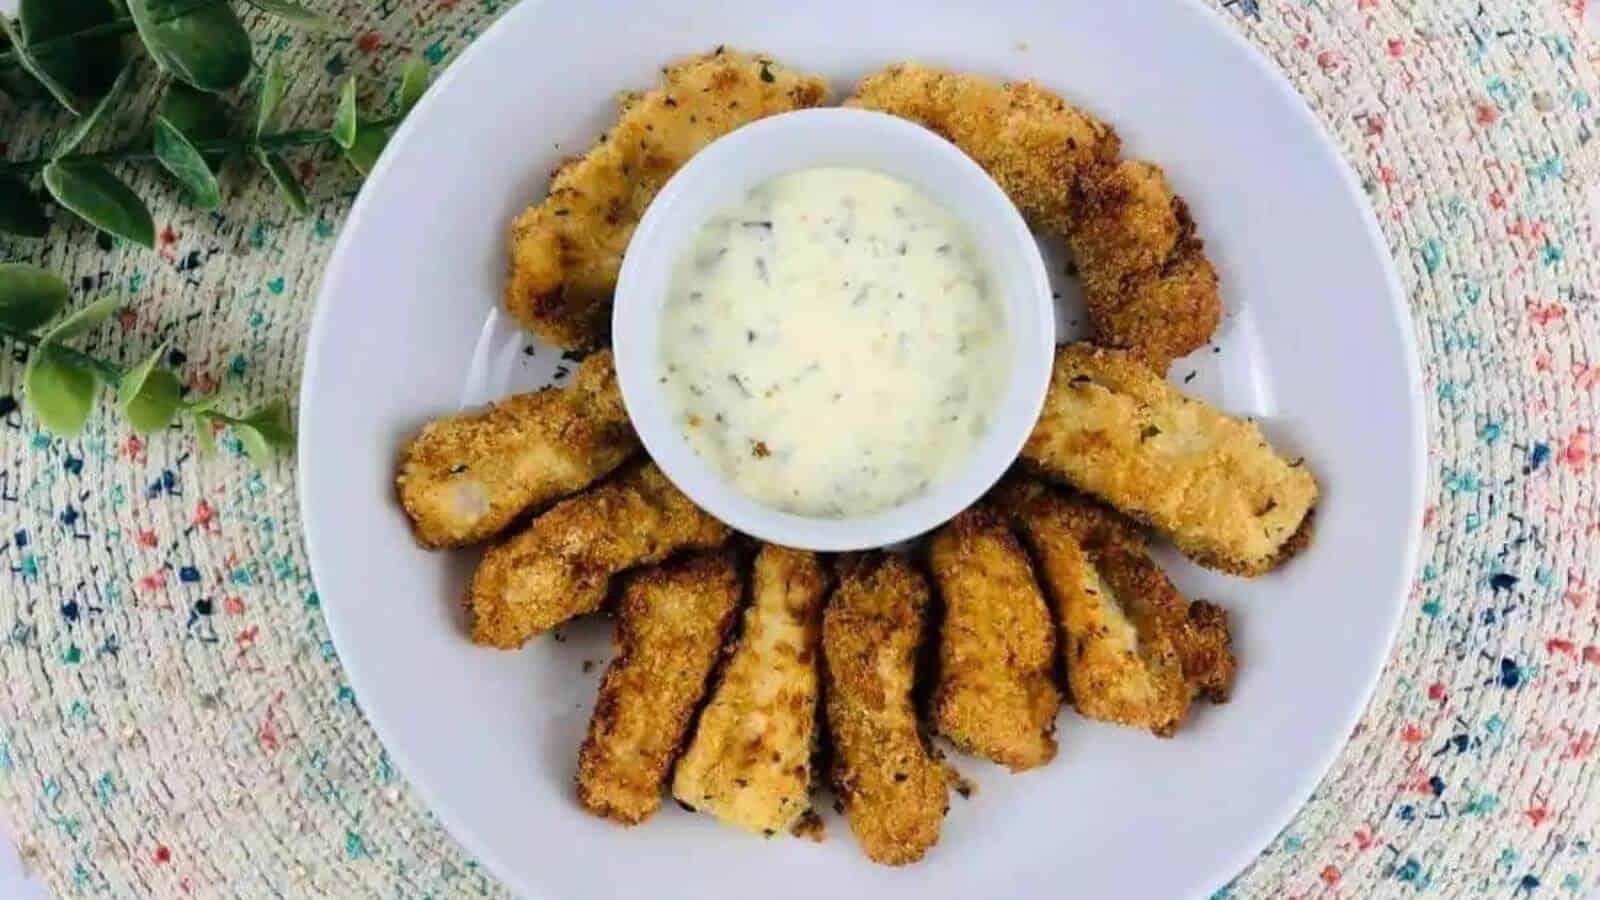 Gluten free fish sticks on a plate with dipping sauce.